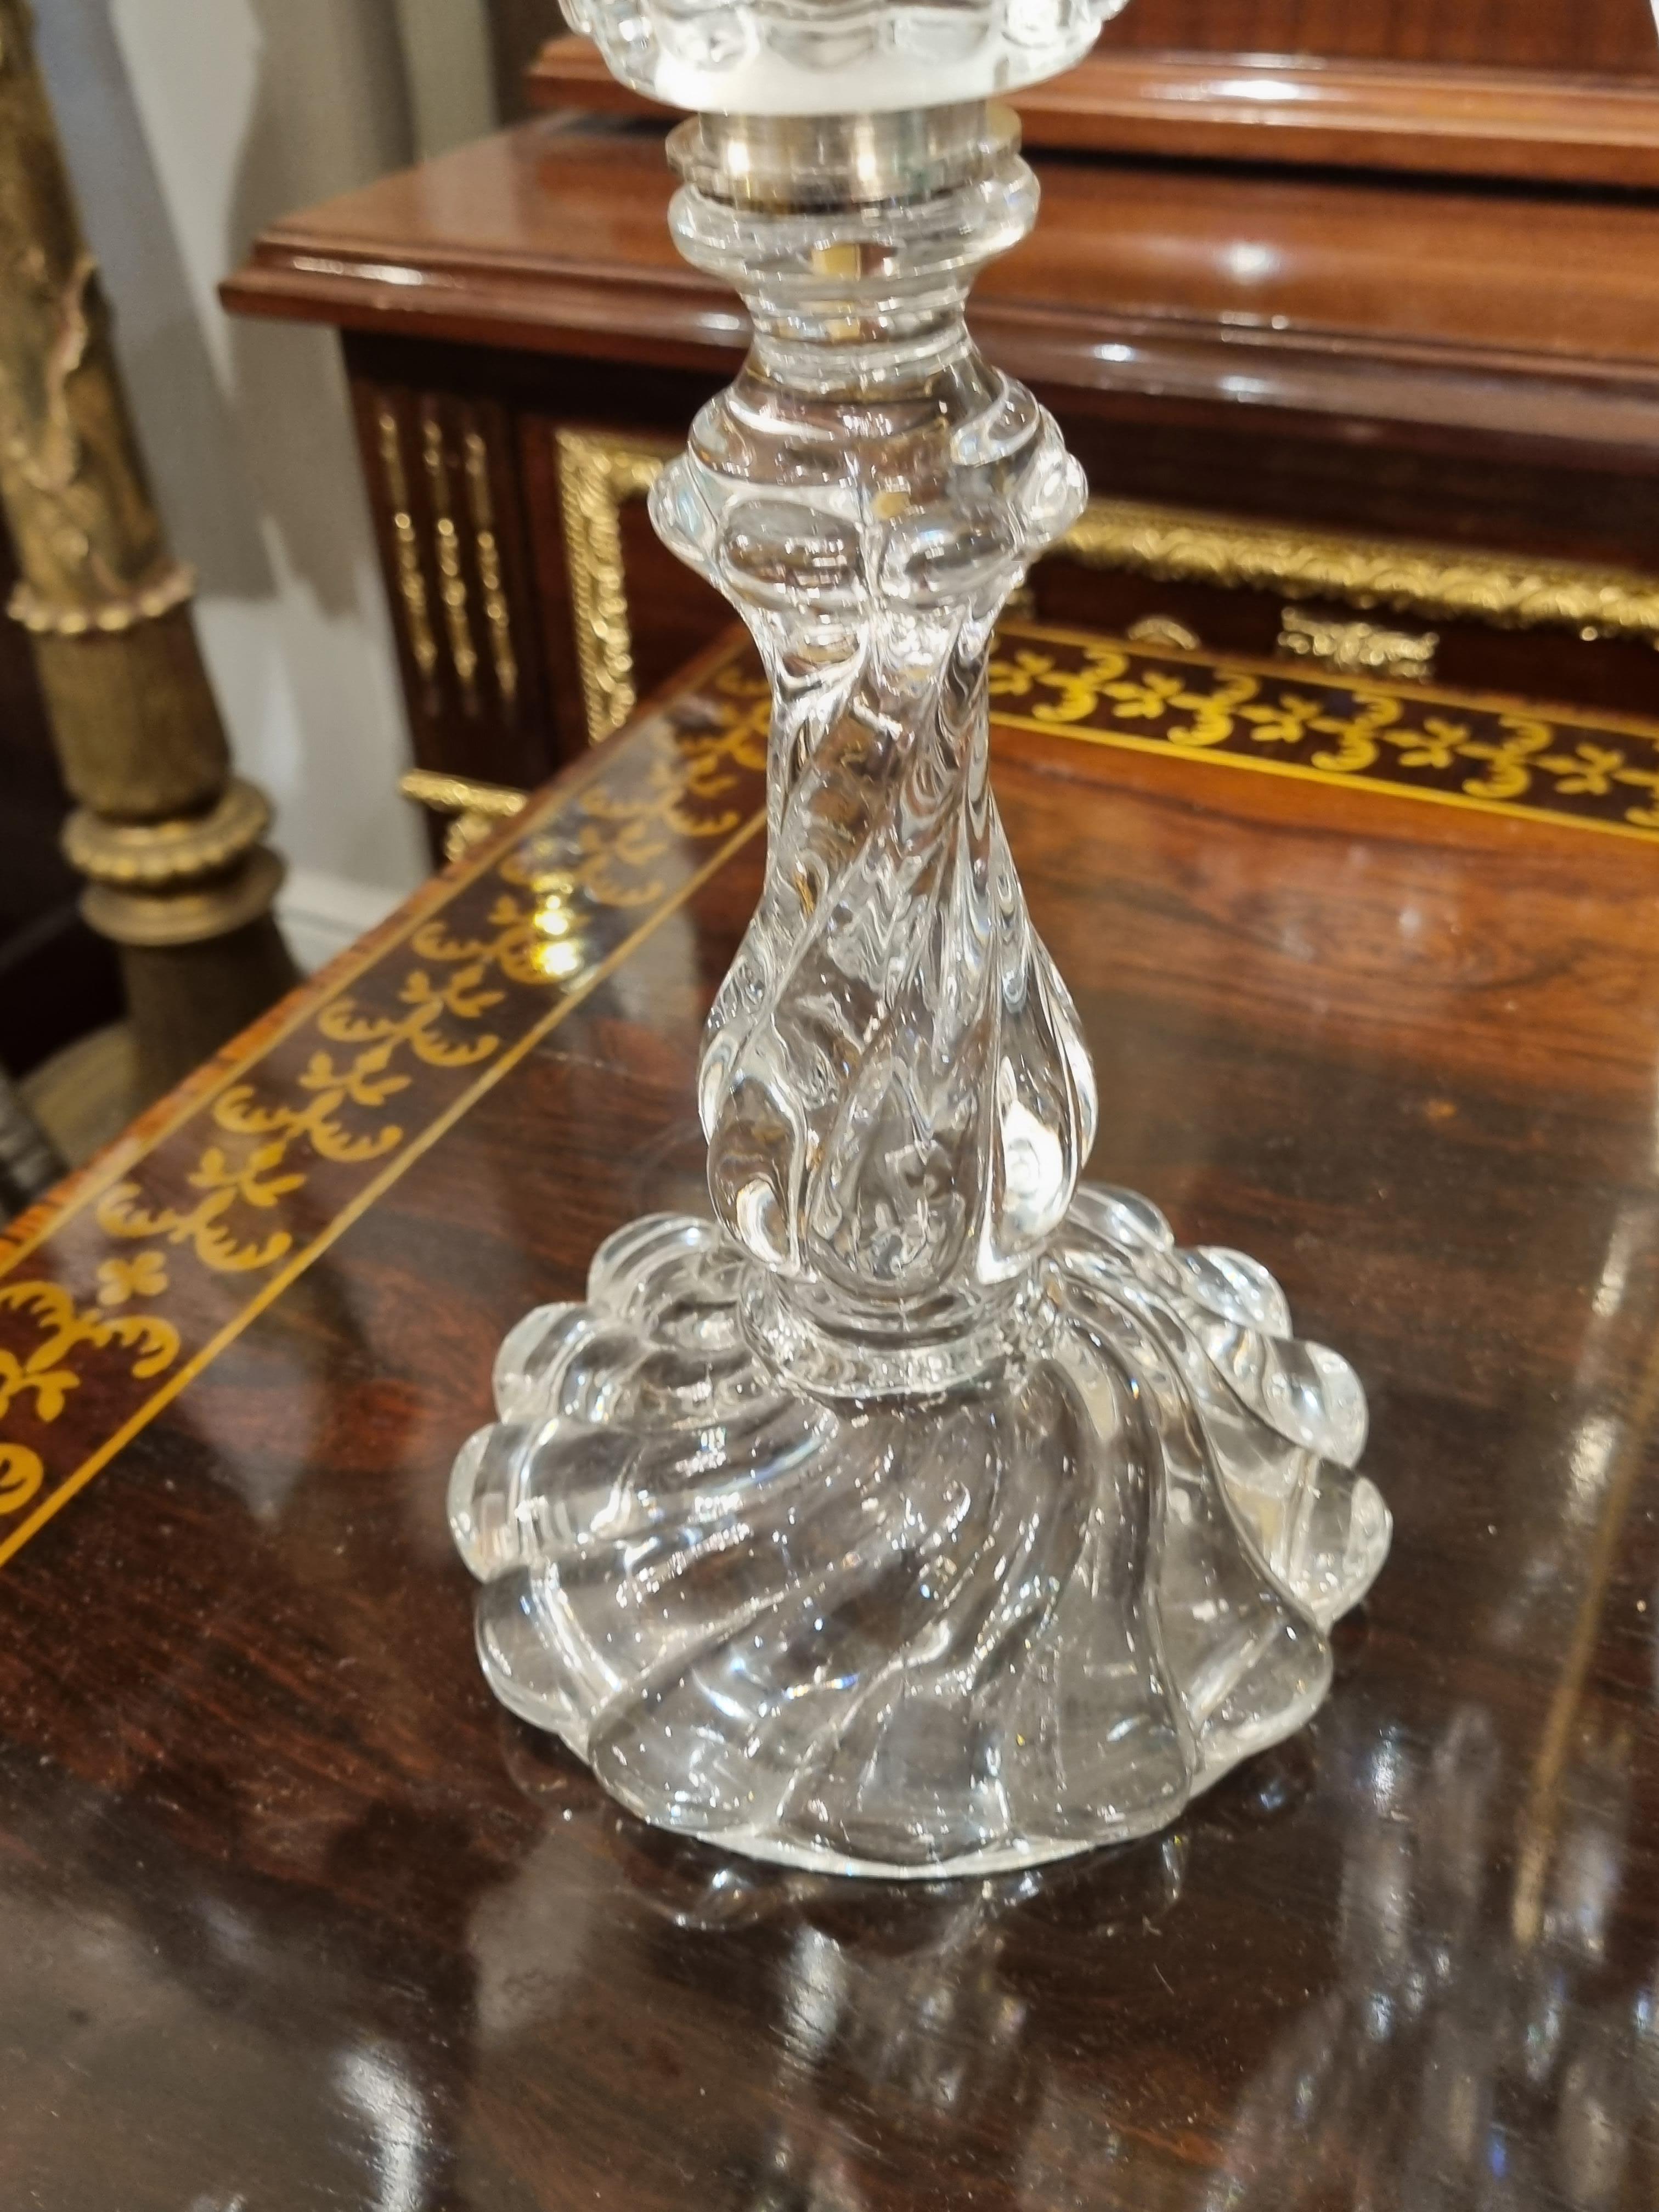 Beautiful Pair of Led Crystal Three Branch Candelabras
These Candelabras are very Much in the Baccarat Style
Excellent Quality, quite heavy
Lovely Turned Crystal Base 
They Date C20th